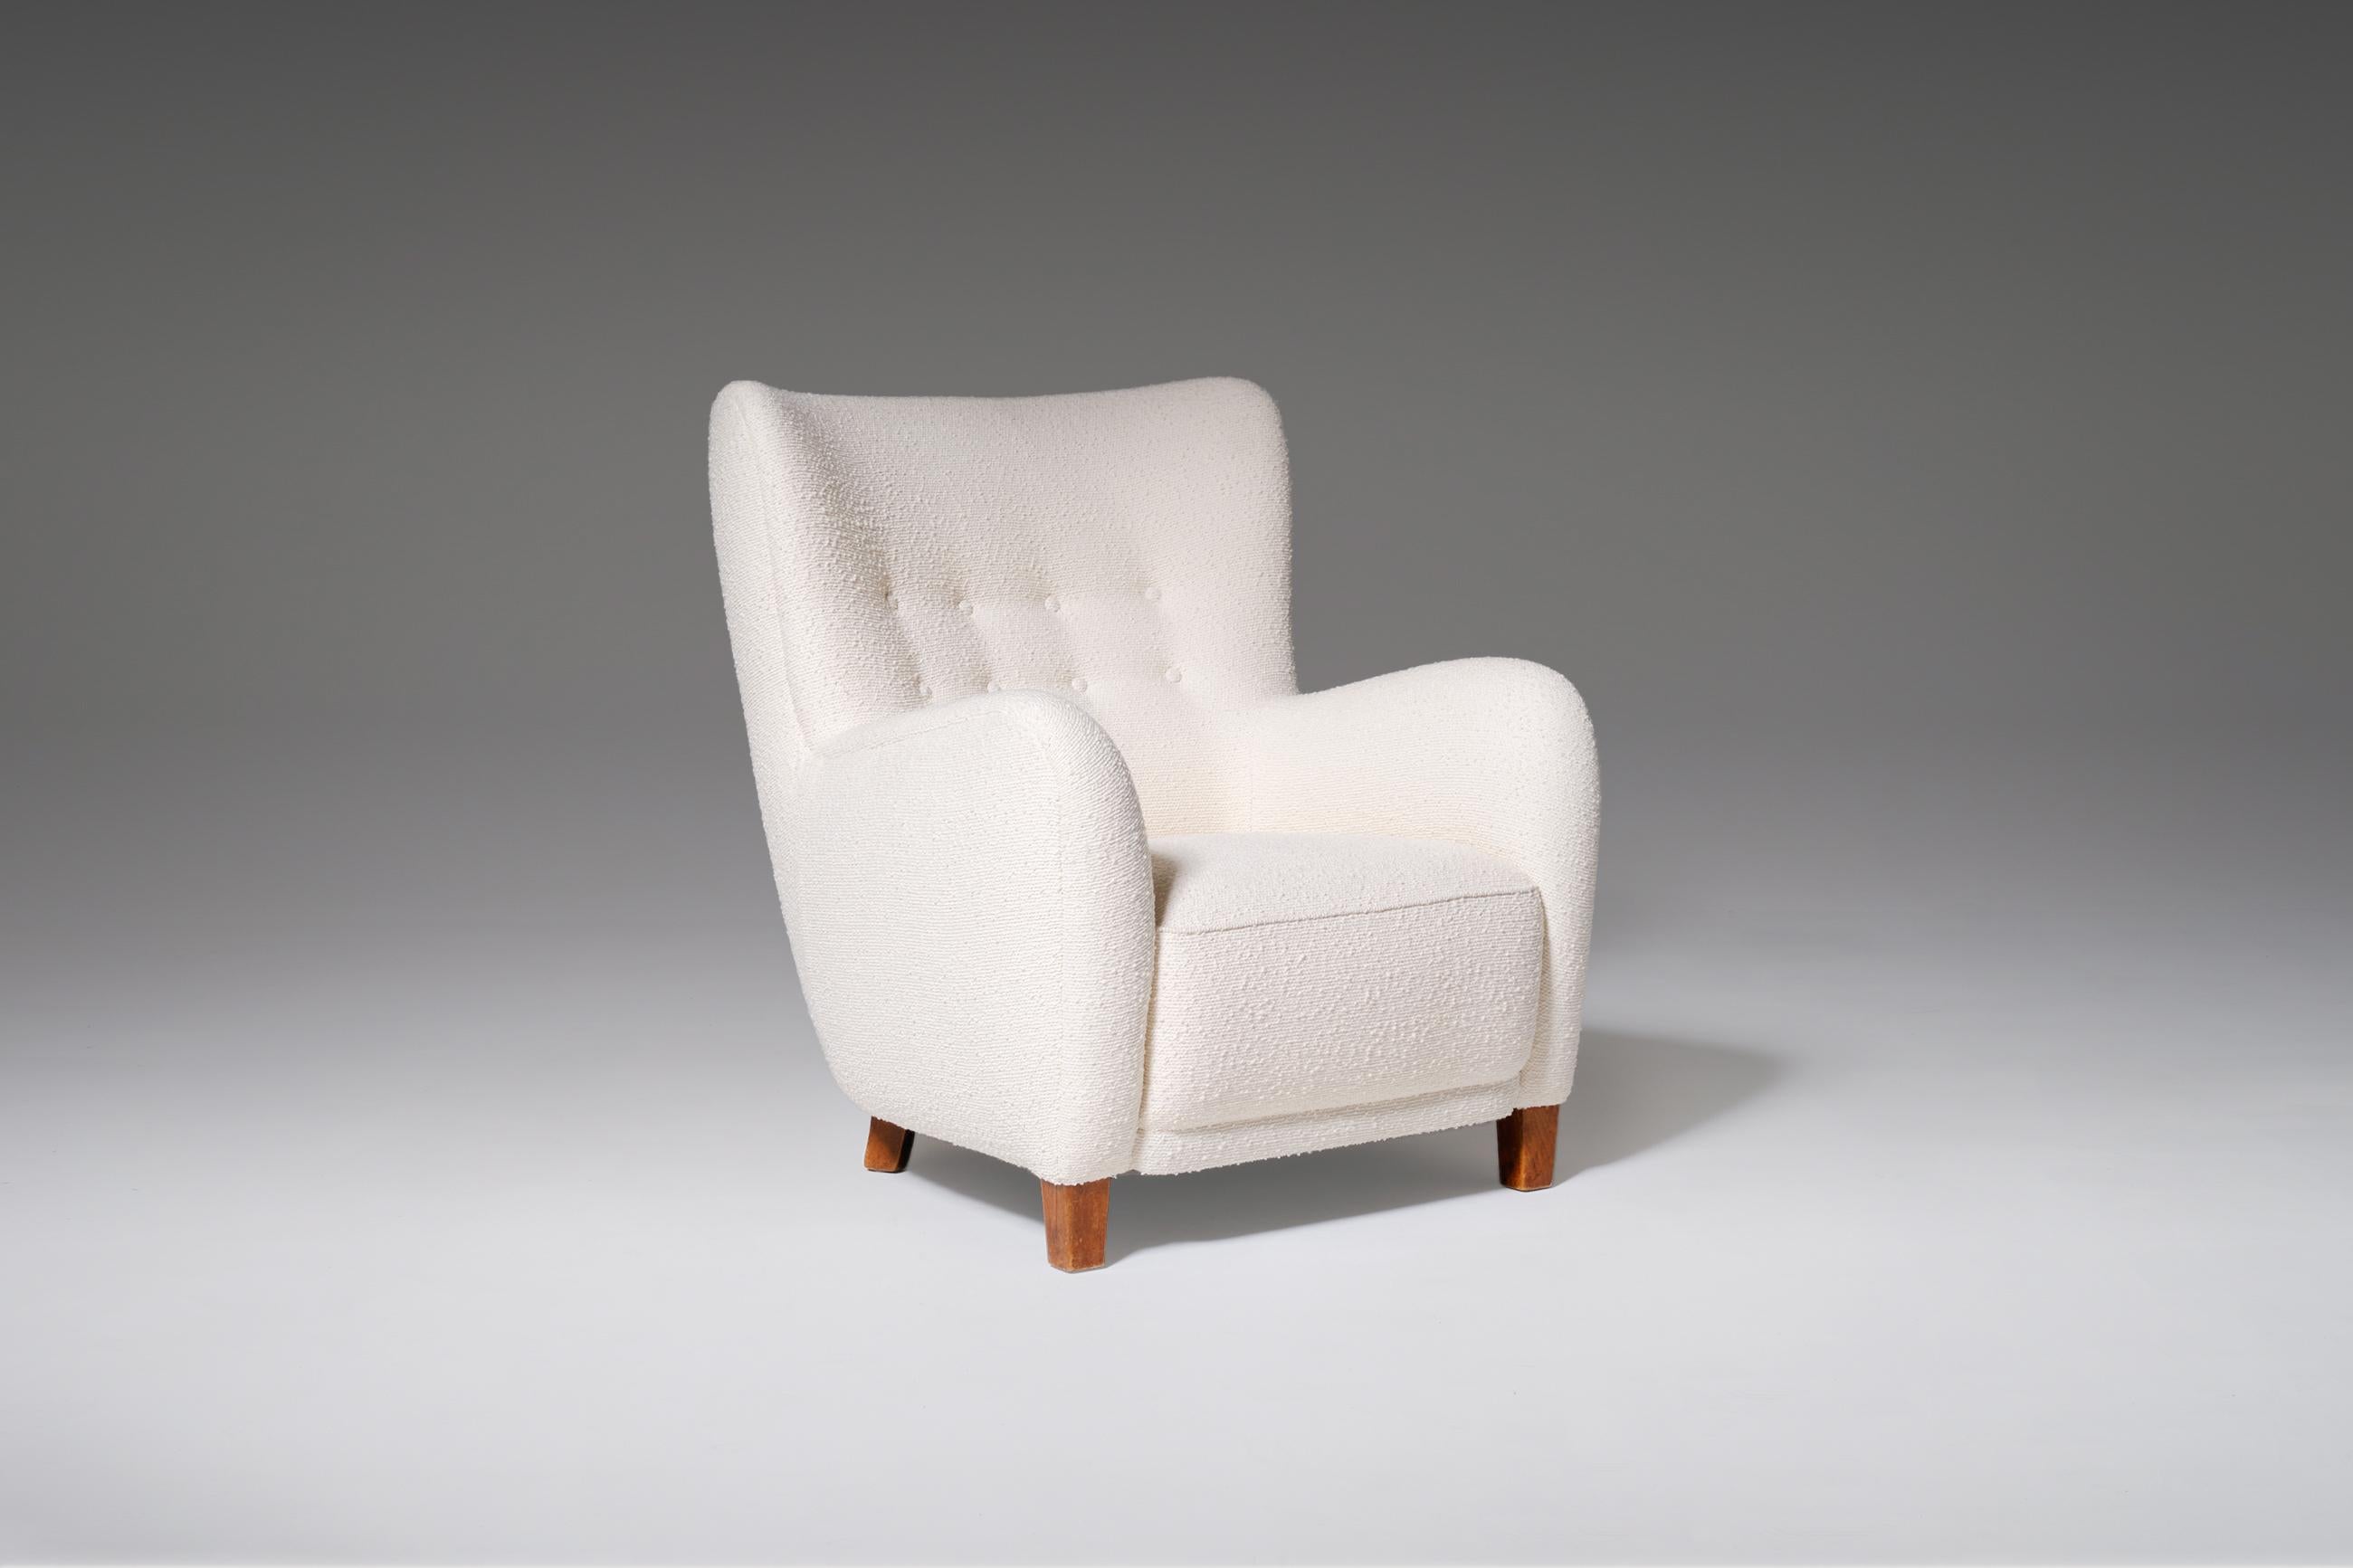 Luxurious Danish cabinetmakers lounge chair in the style of Frits Hansen — 1940s. The chair is fully restored, reshaped and reupholstered. The new Bouclé fabric goes very well with this chair and makes the bulky round shapes stand out perfectly